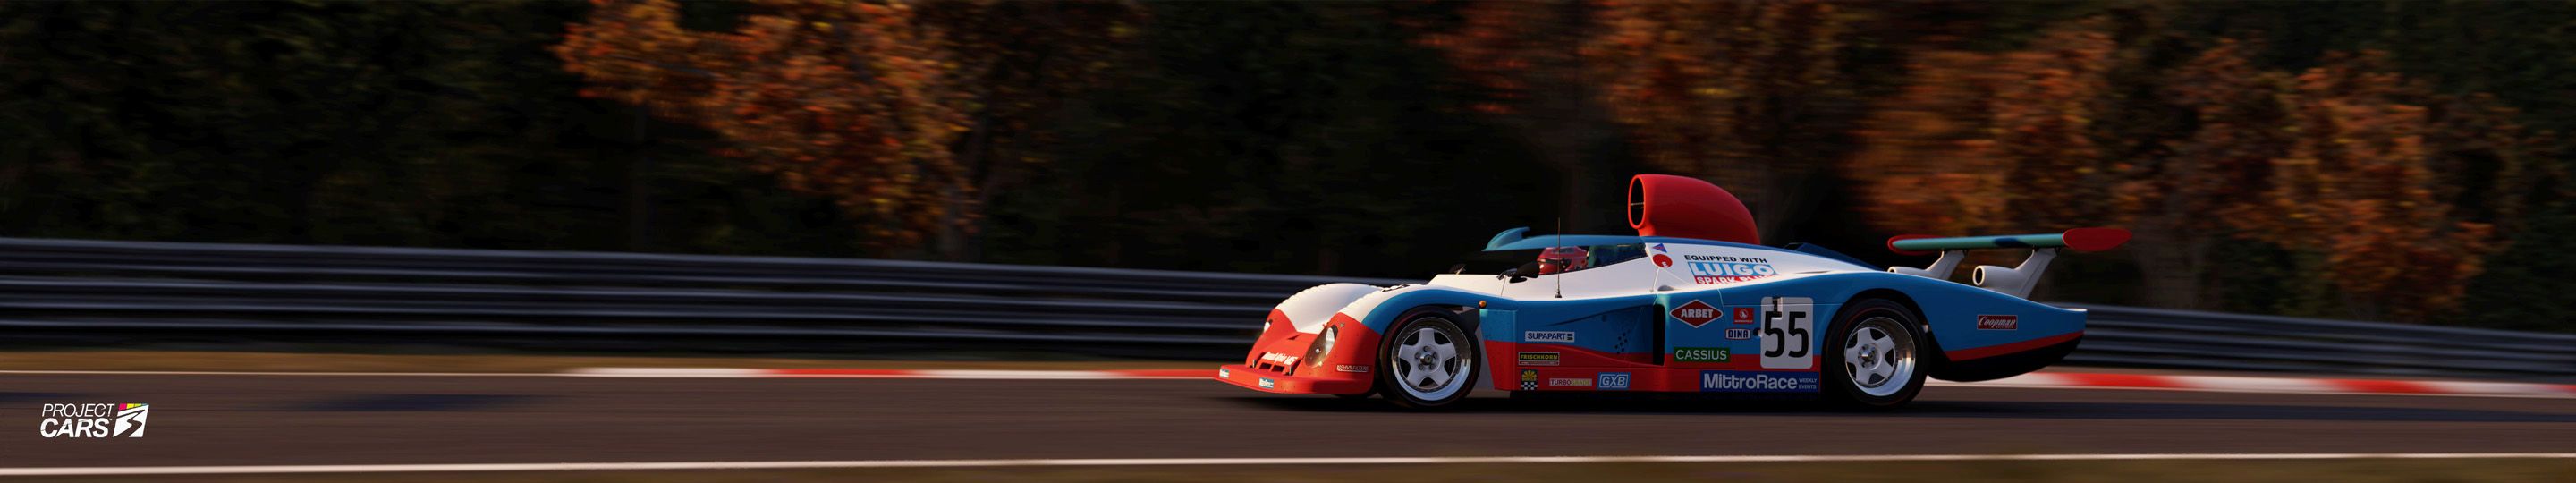 0 PROJECT CARS 3 ALPINE A442B at NORDSCHLEIFE copy.jpg